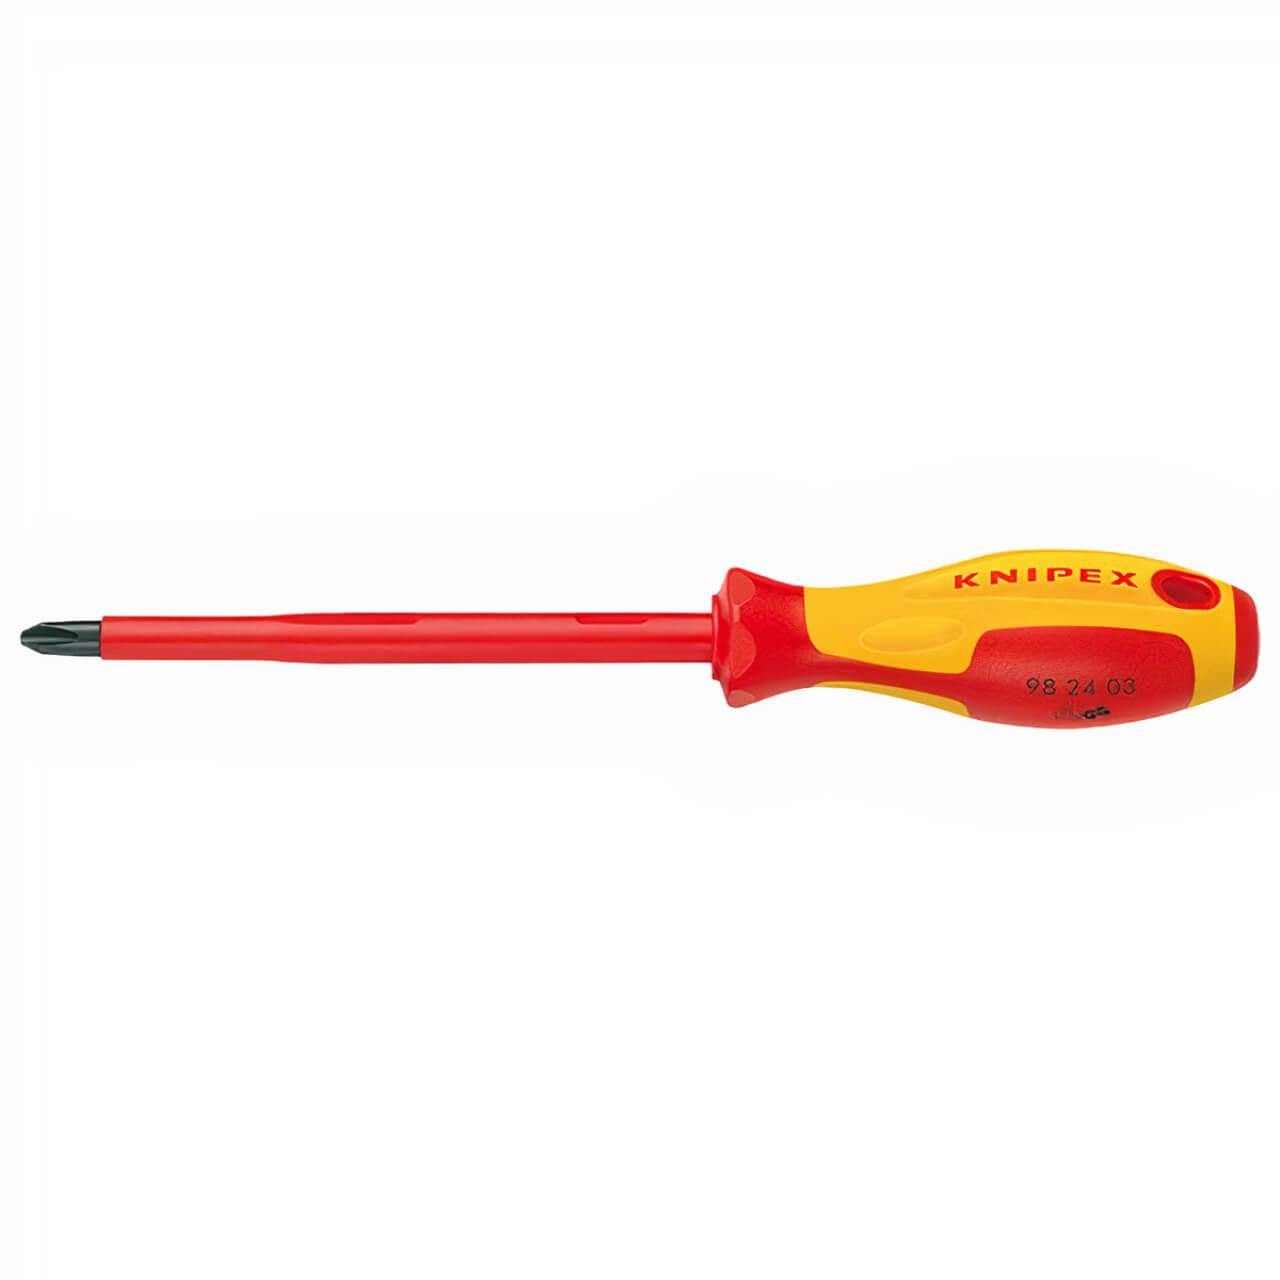 Knipex No.2x100mm Phillips 1000V Insulated Screwdriver